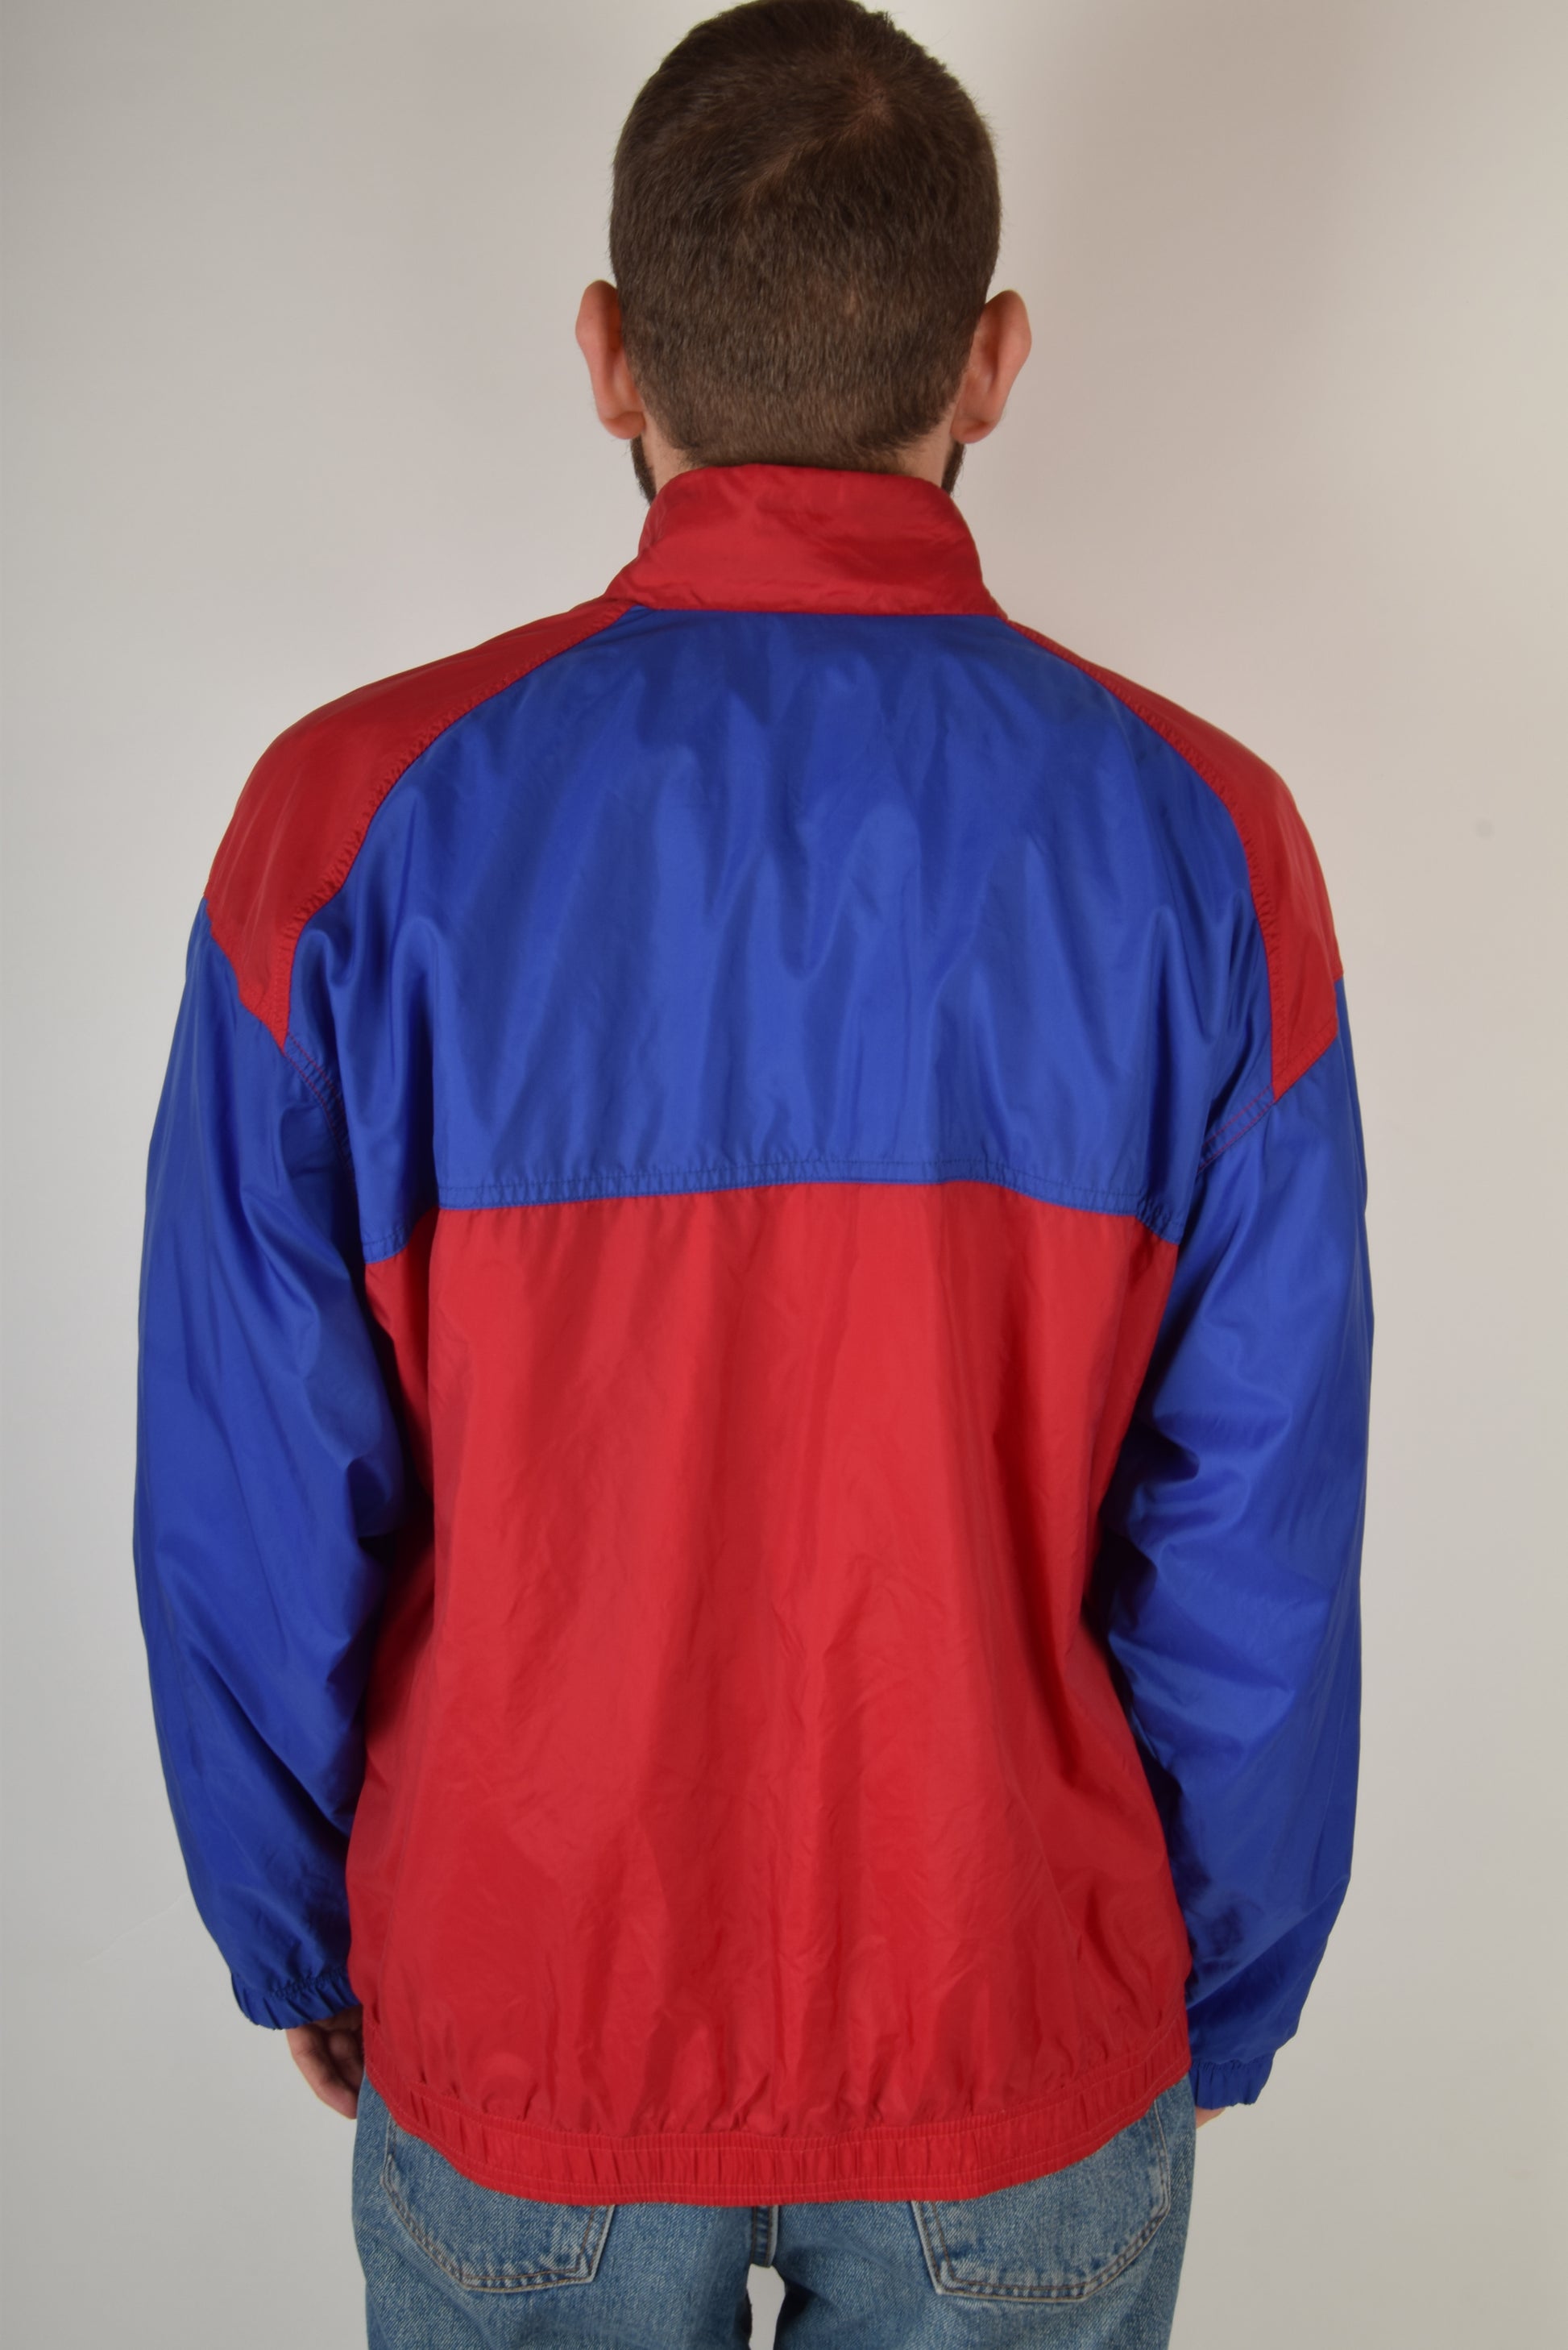 Vintage 90's Nike Jacket / Shell Size L  Red Blue White